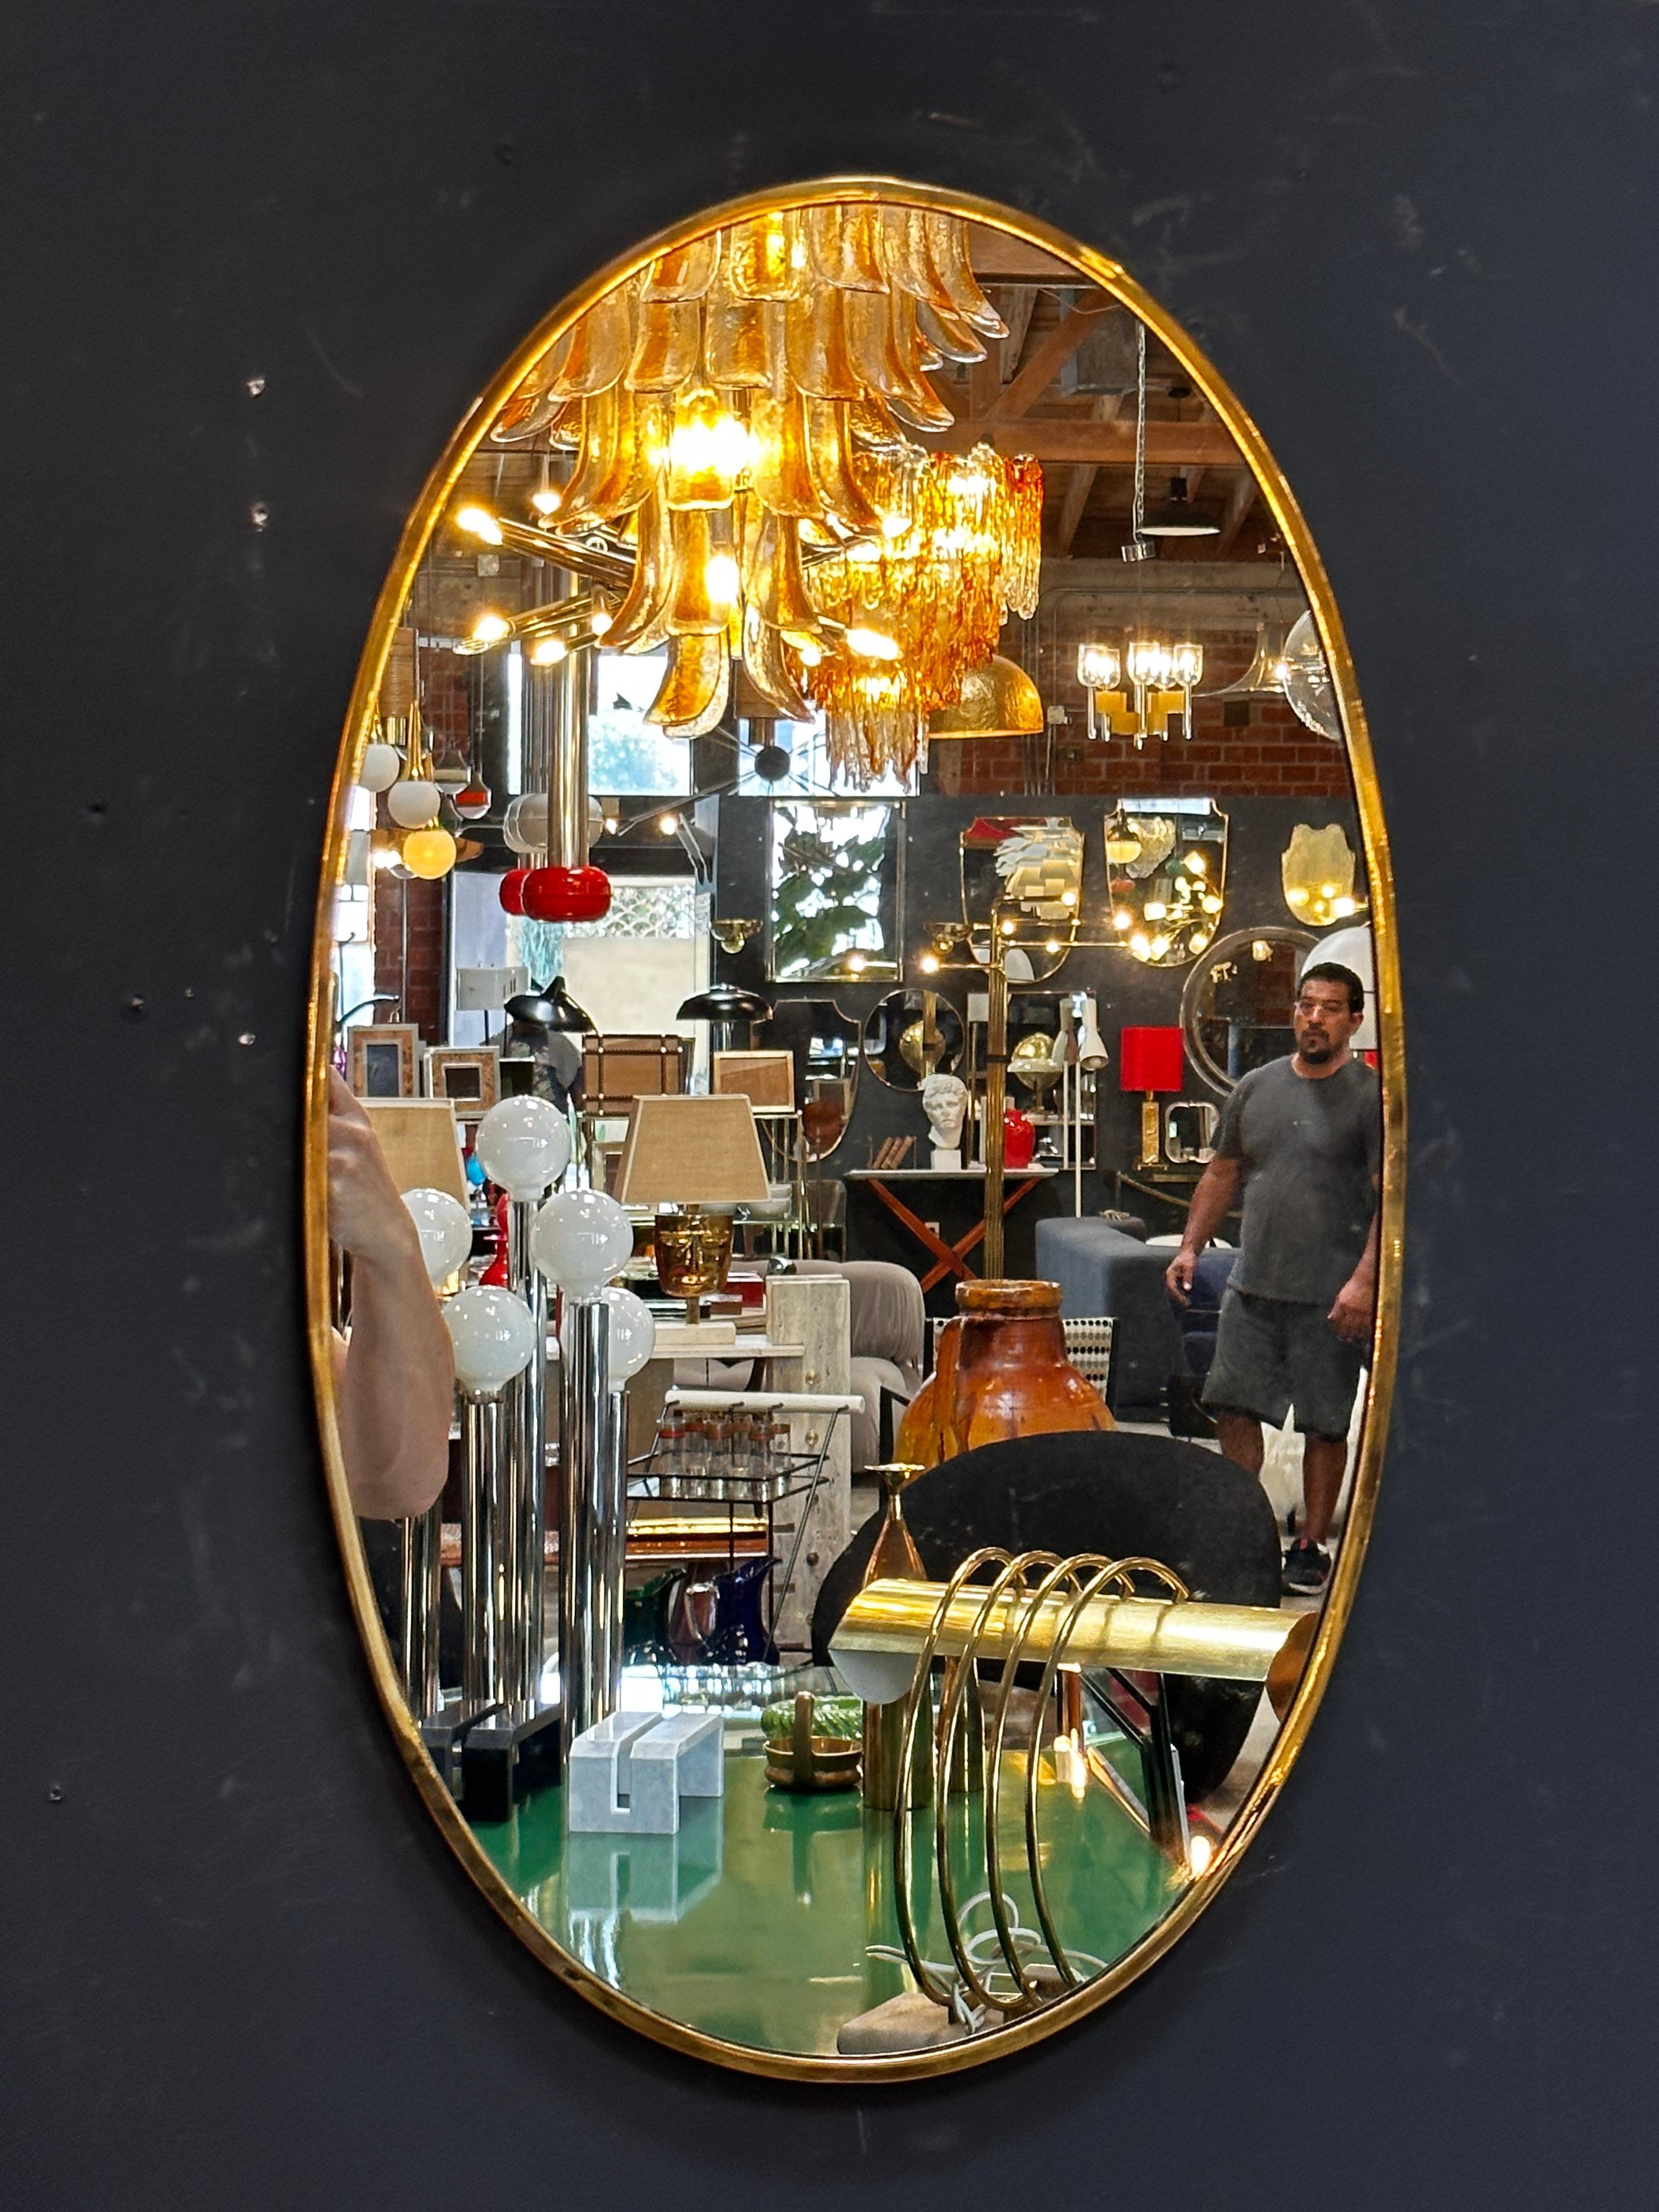 The Vintage Italian 1980 Oval Brass Wall Mirror is a classic and elegant piece with a timeless oval shape and a beautiful brass frame.

